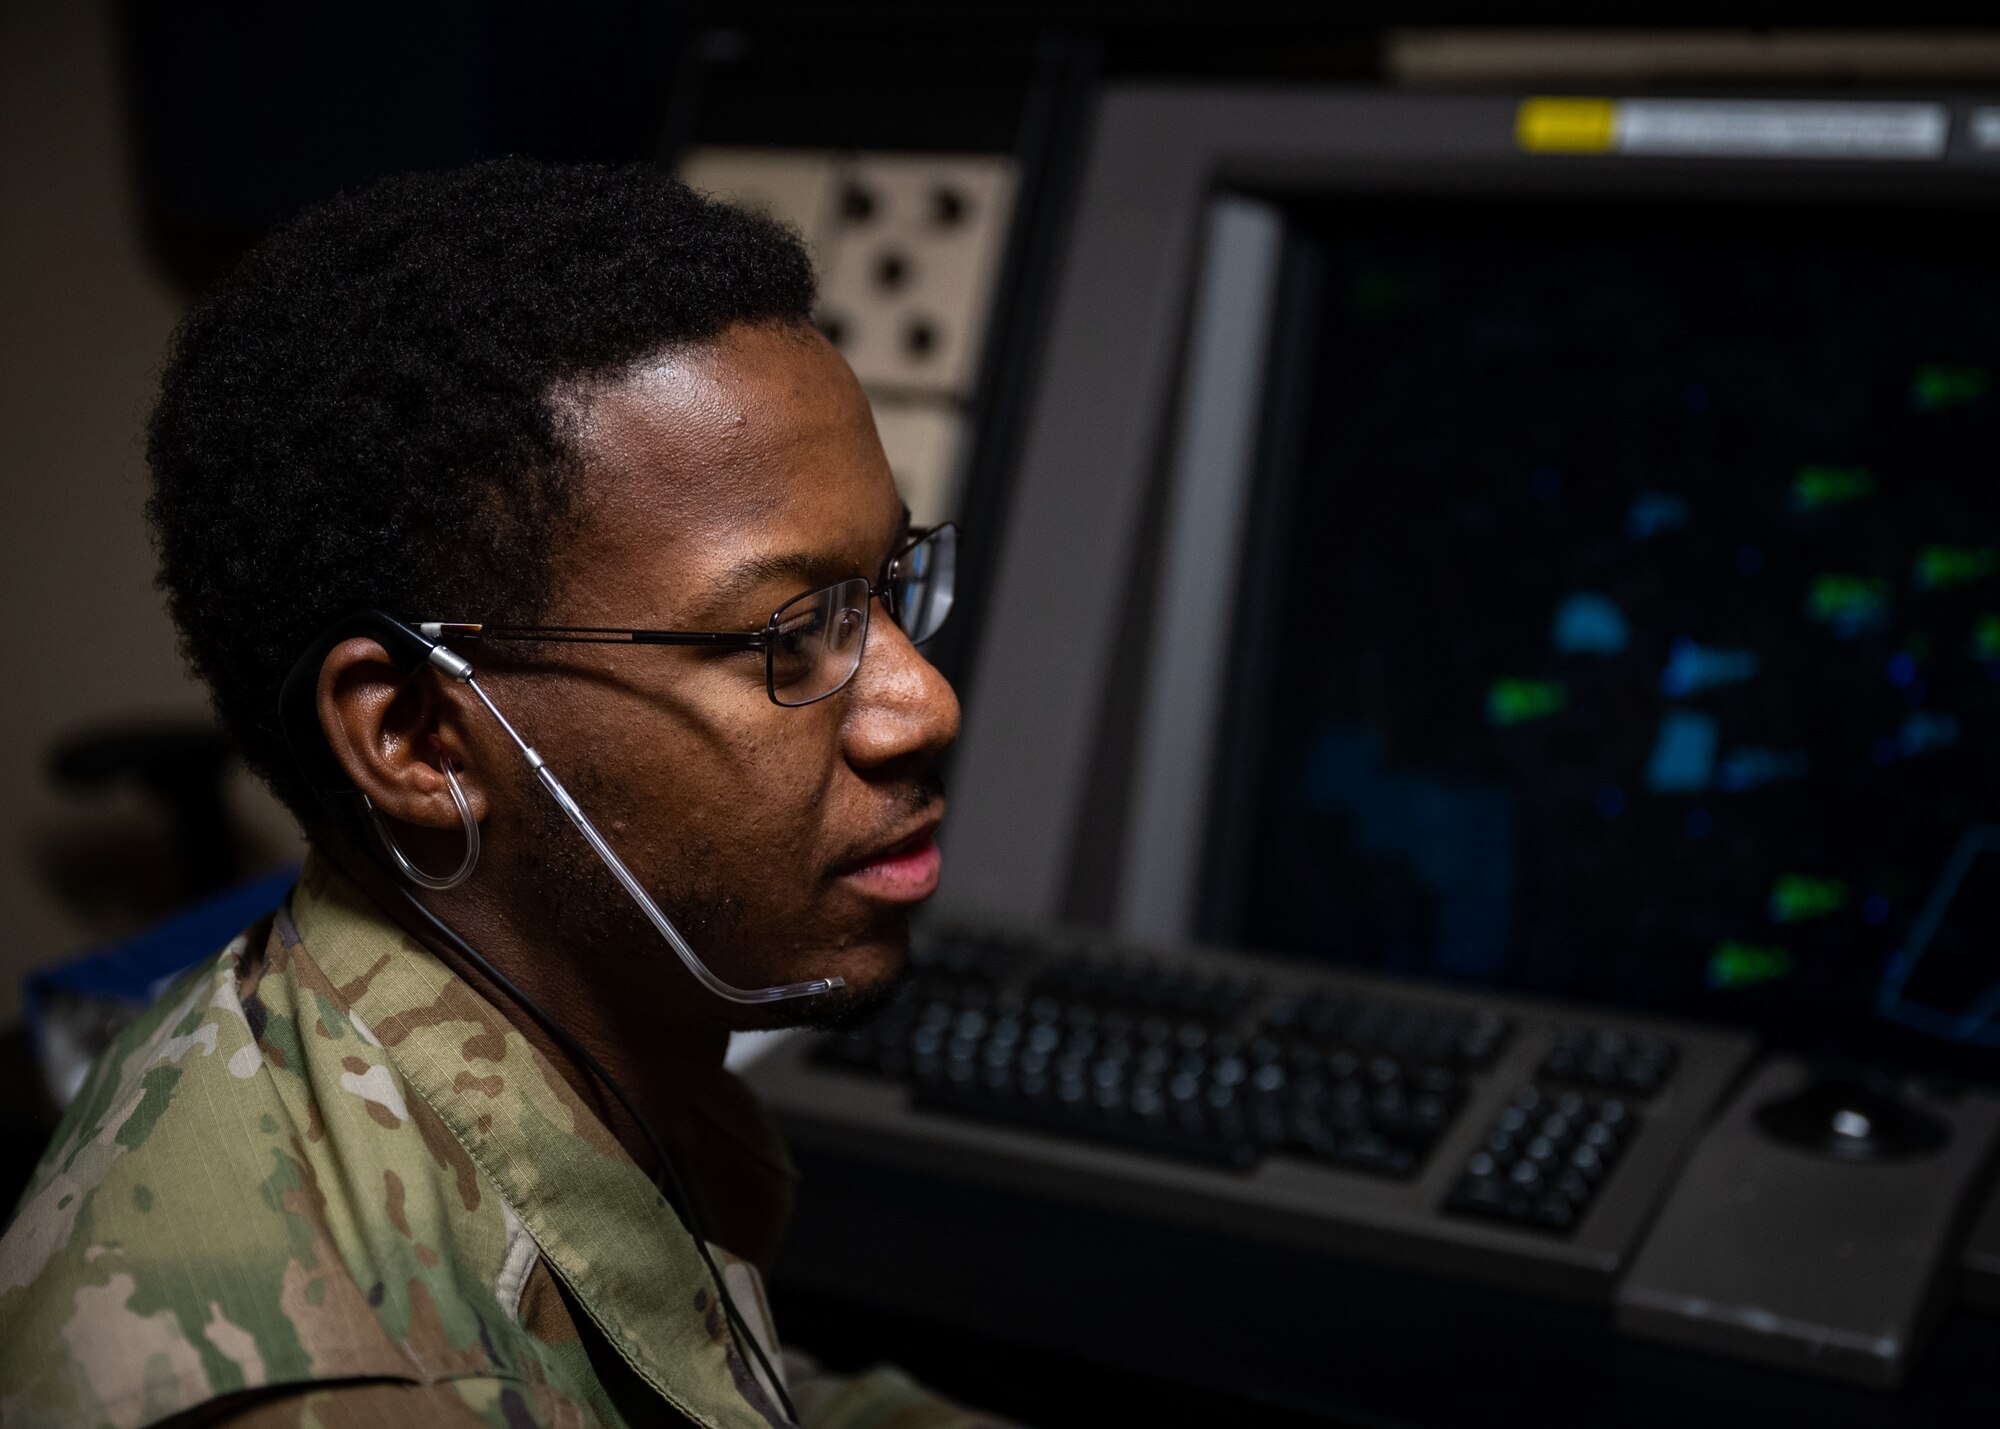 Male Airman wearing a headset looks to the right in front of a dark screen with blue and green aircraft markers